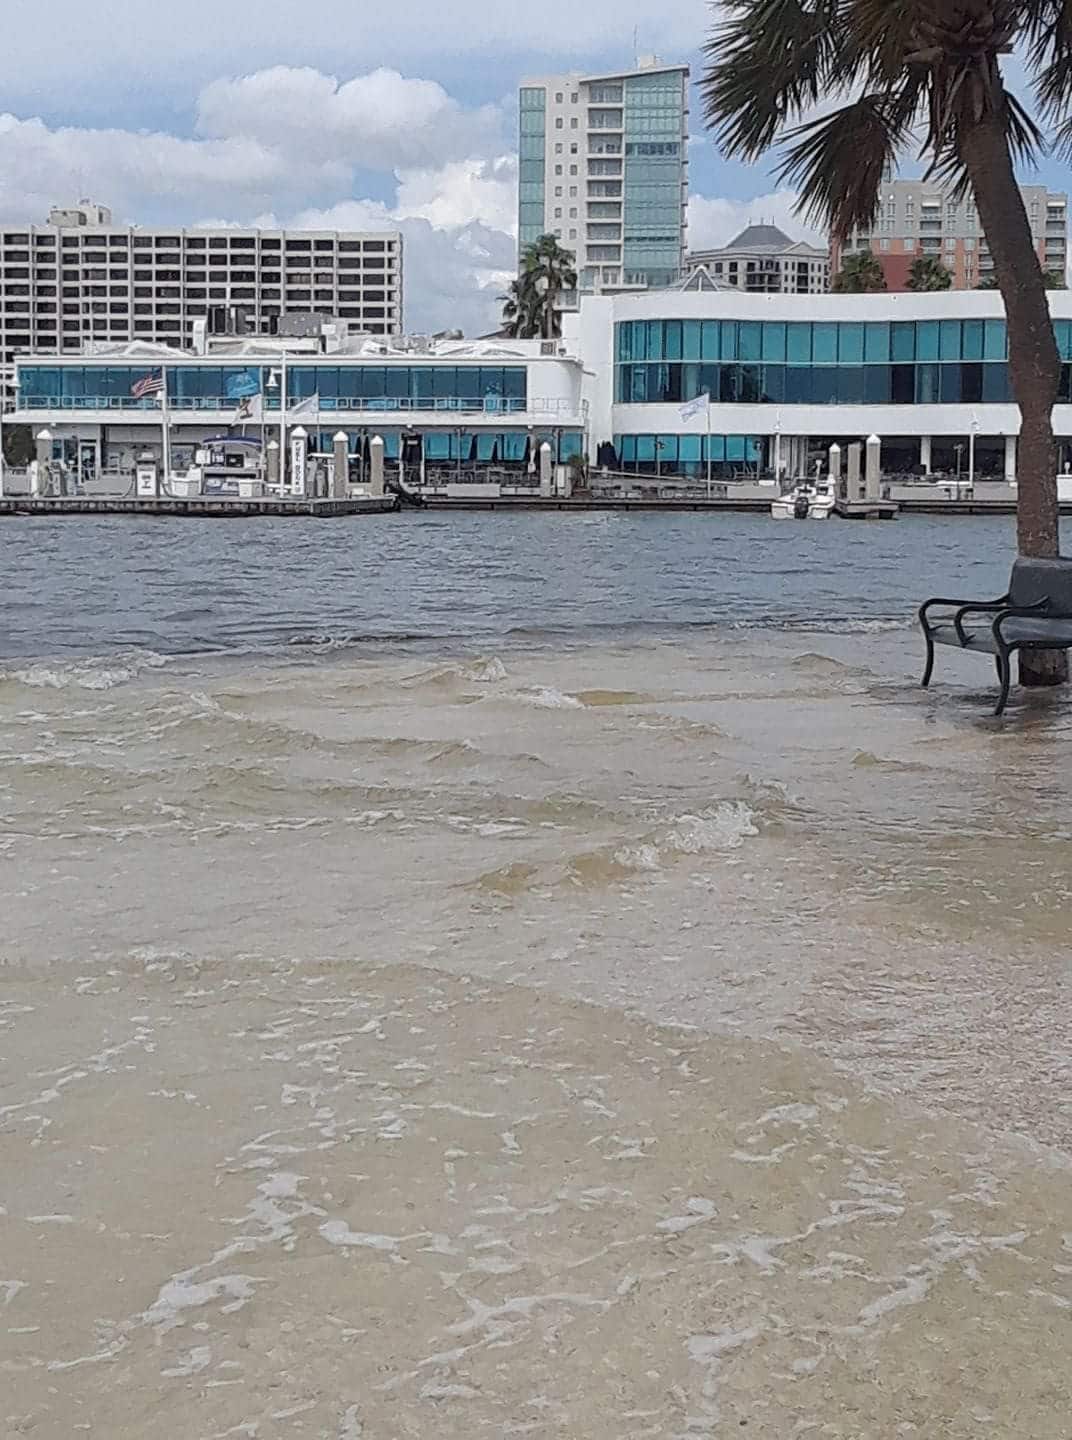 2017 10 7 King Tides & And Hurricane Nate water overtopping seawall at Bayfront Park